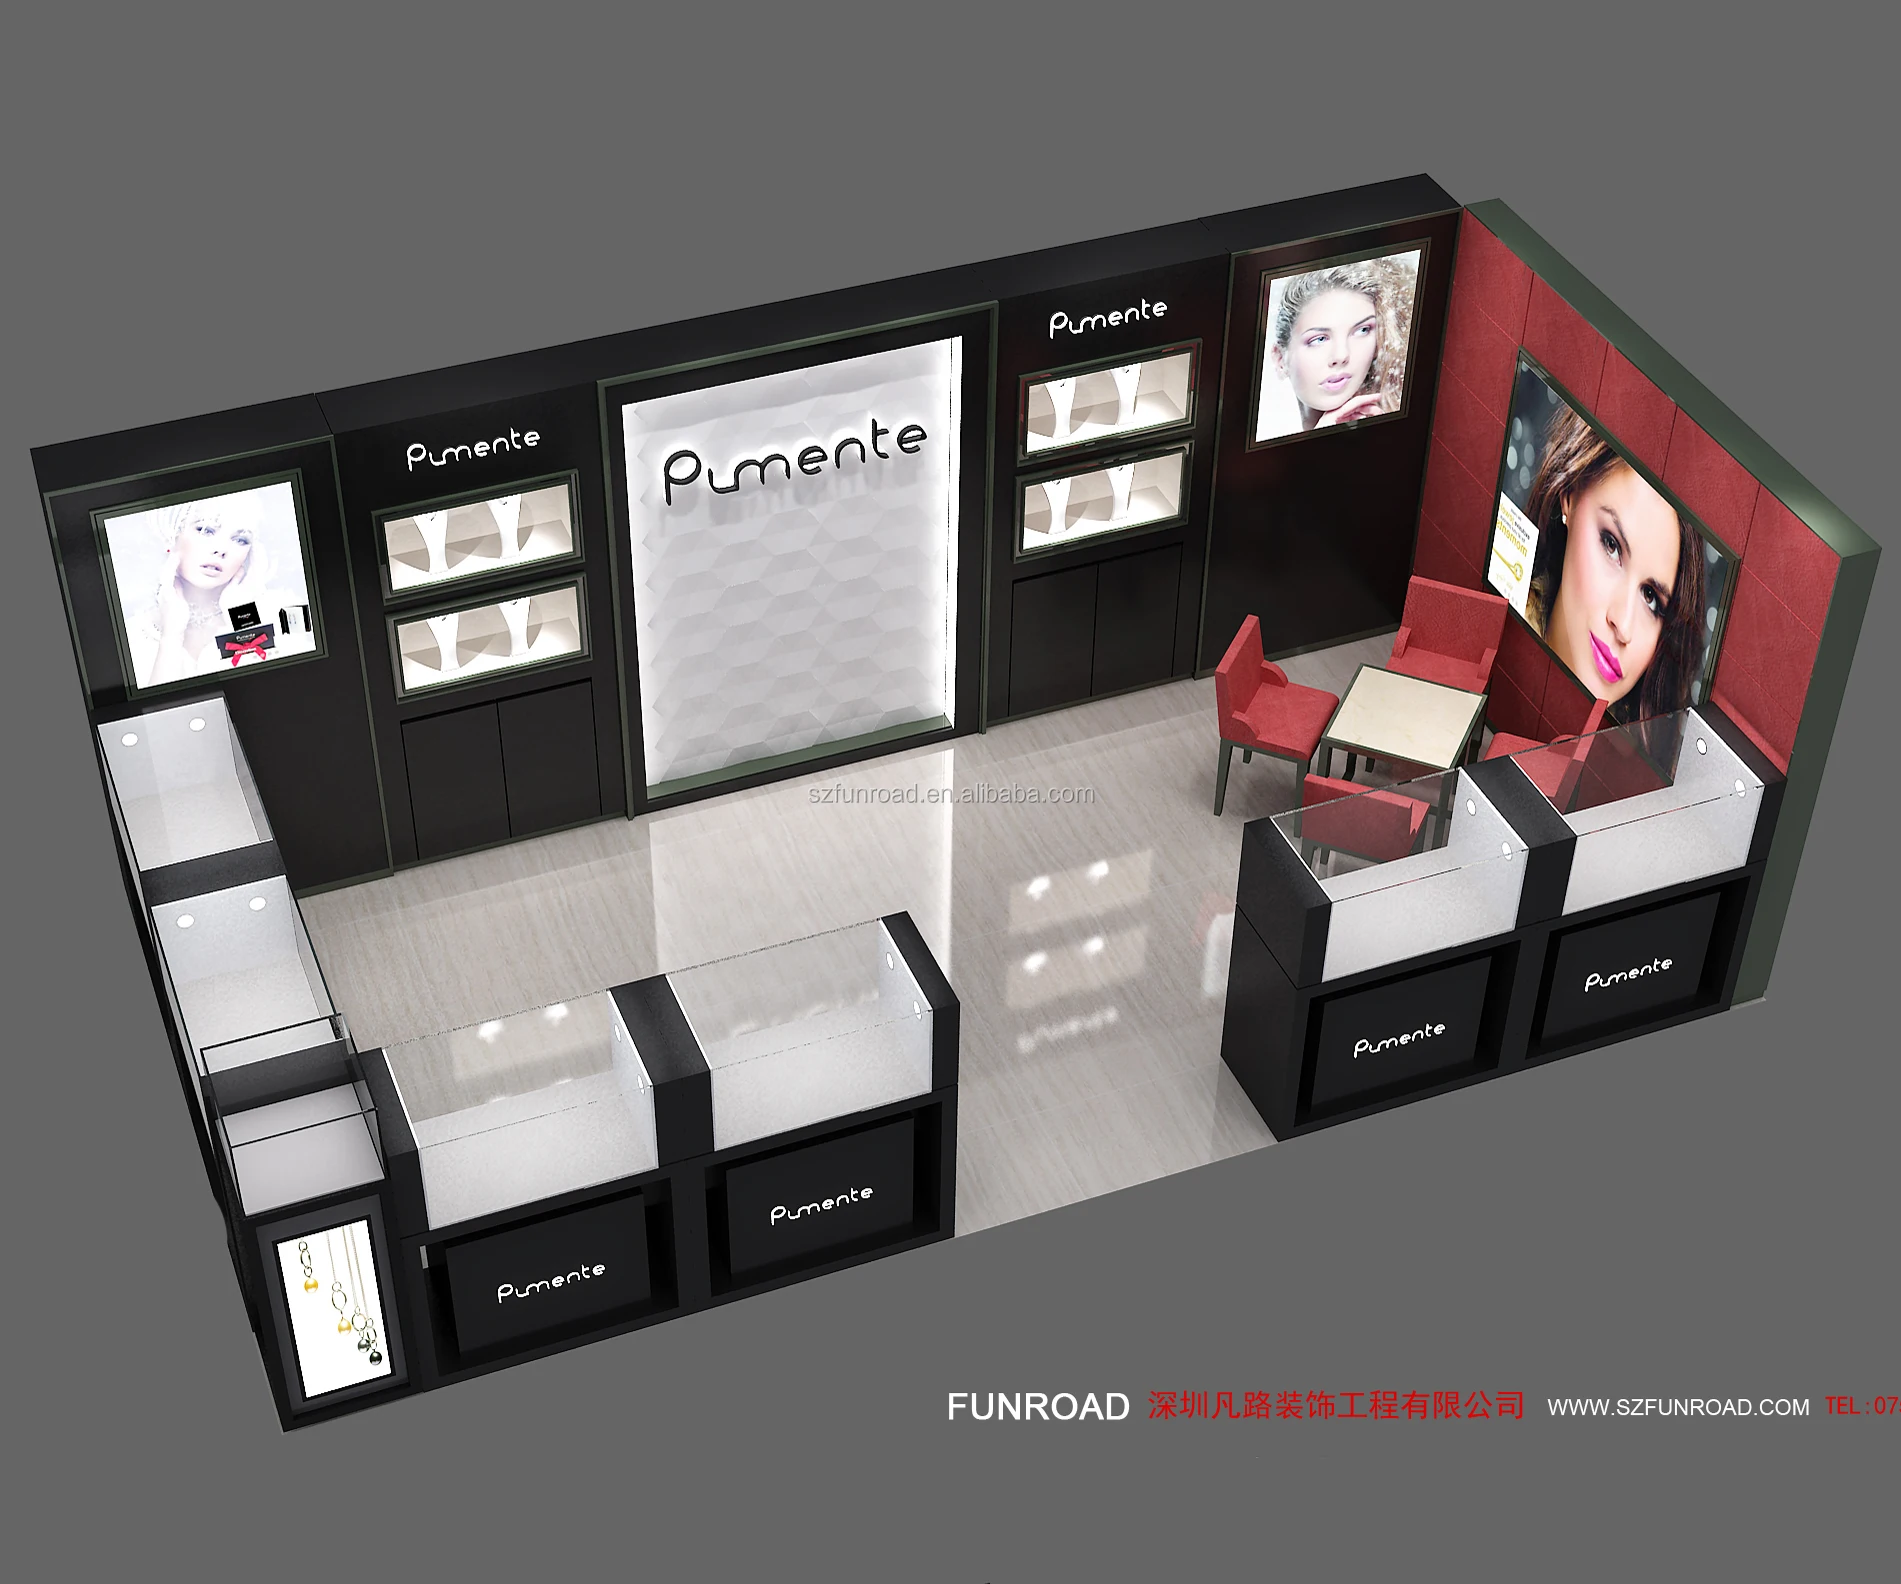 Wood jewelry display kiosk design for sale from Chinese manufacturer 